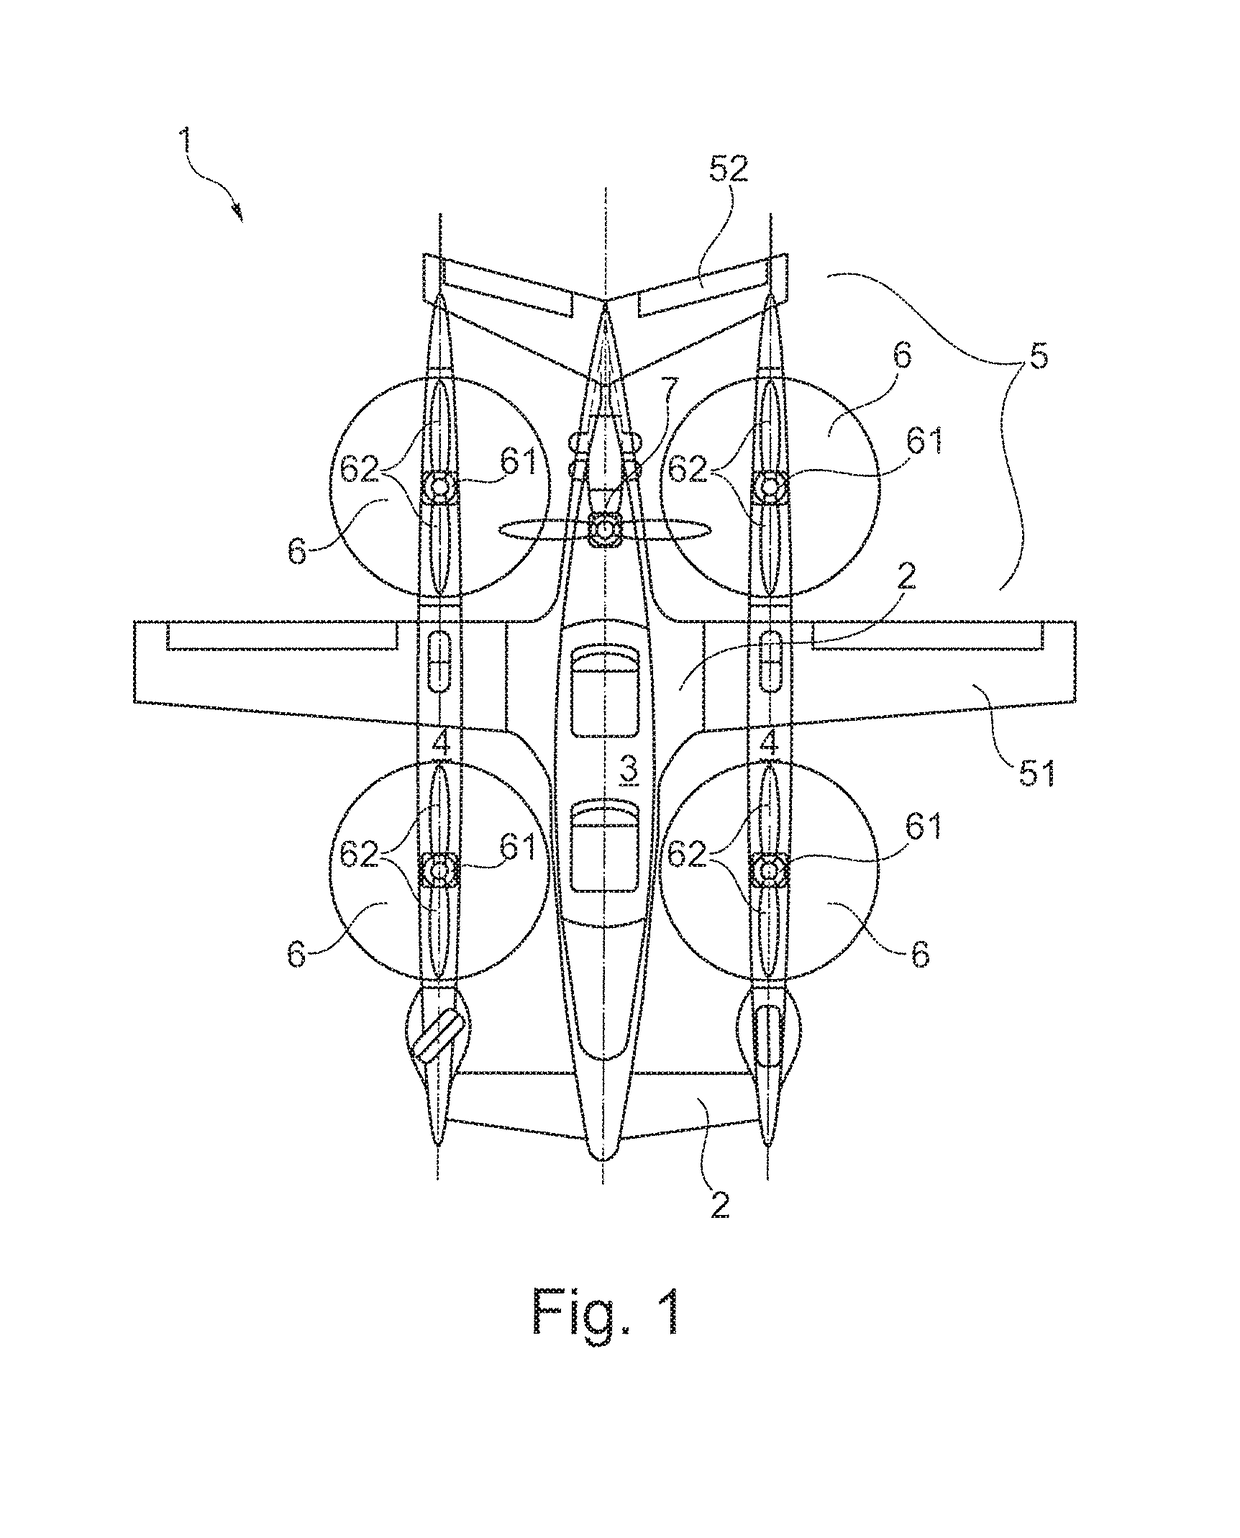 Aircraft capable of vertical takeoff